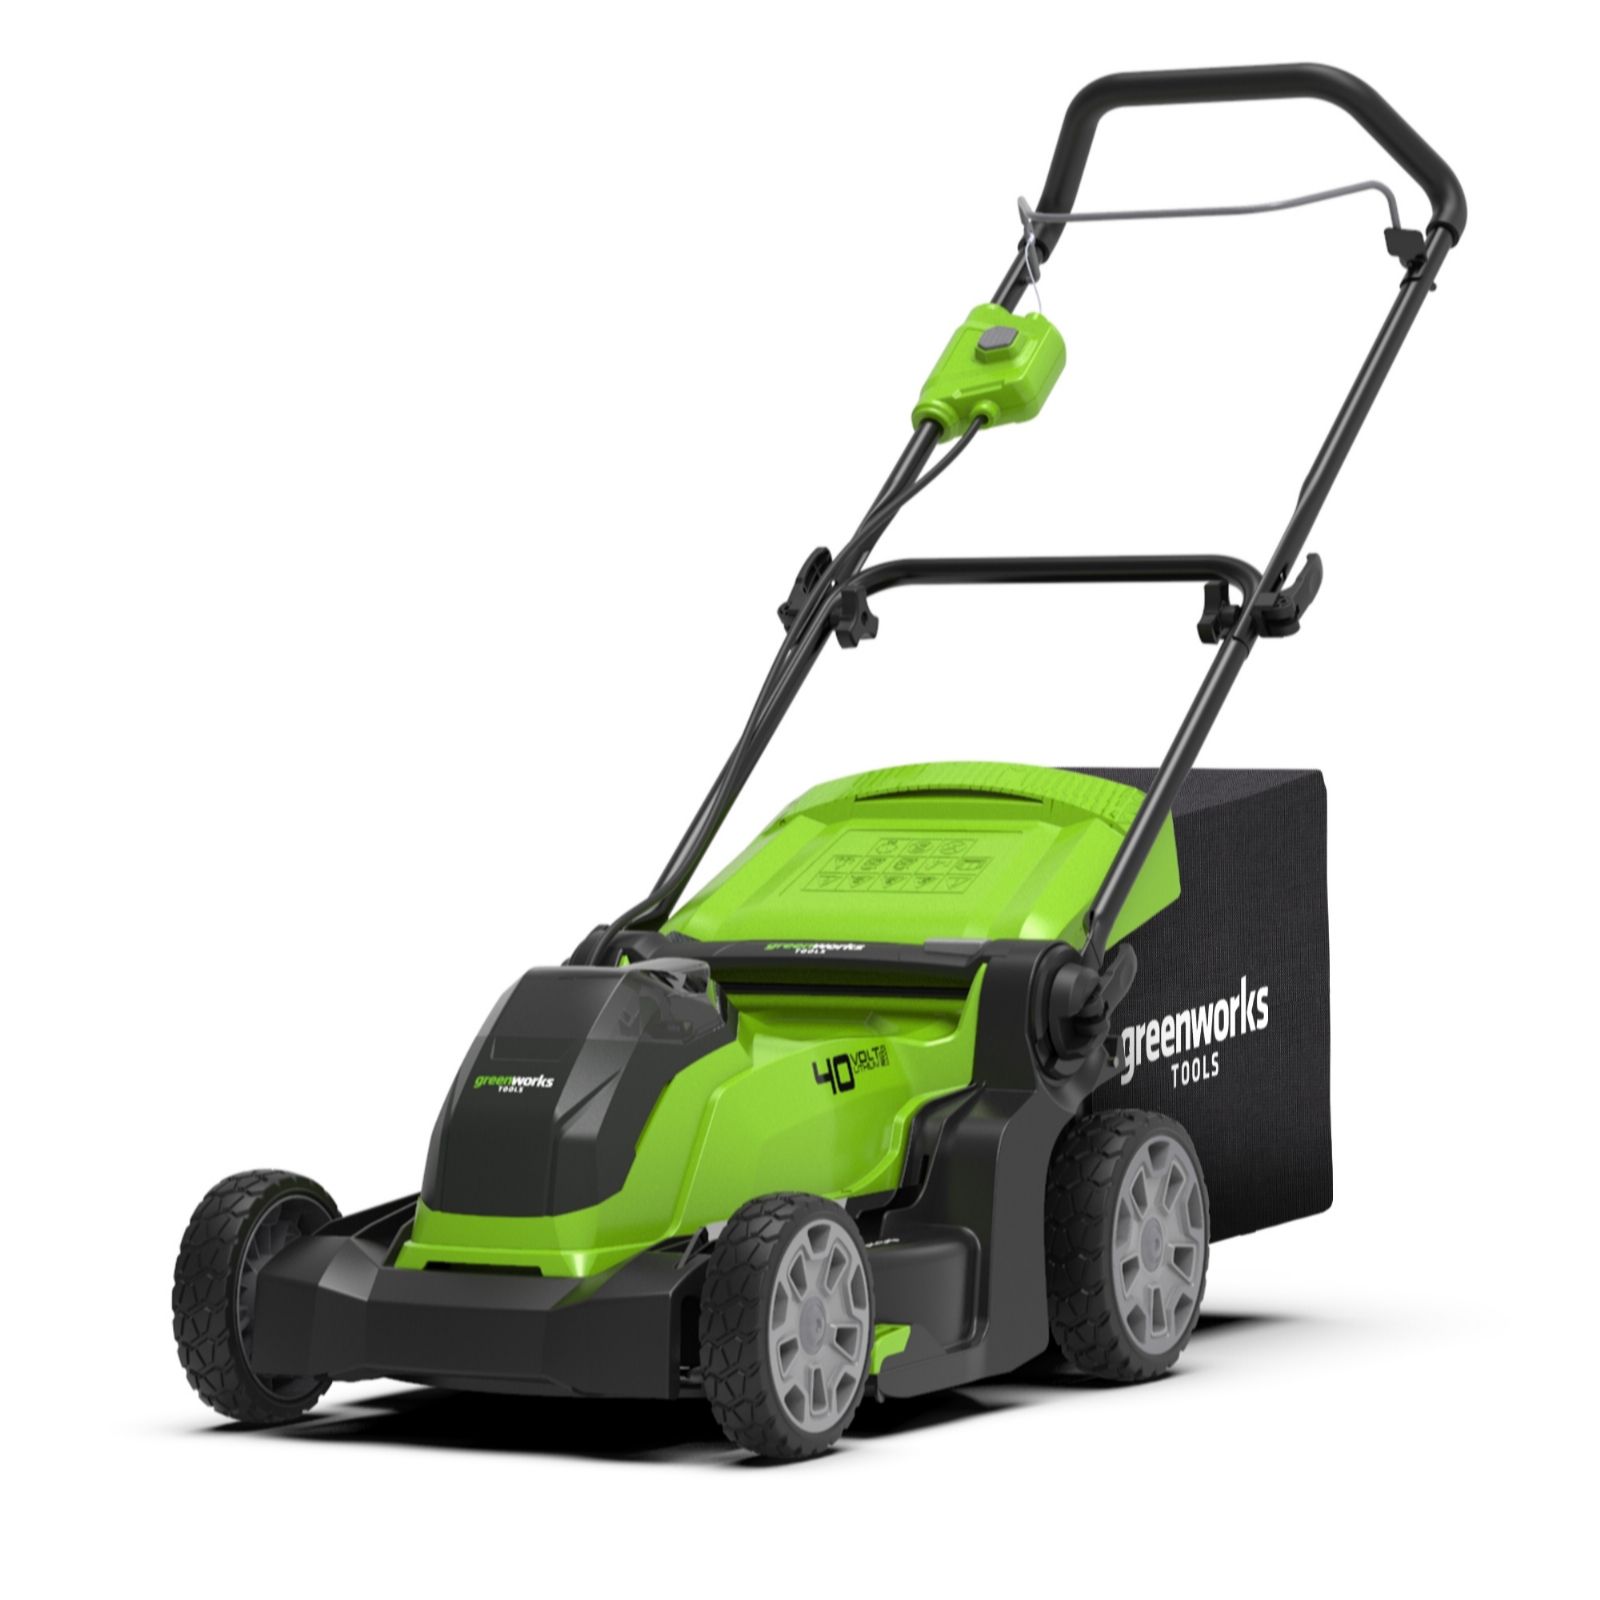 Greenworks 40V 41cm Cordless Lawn Mower with 2.0Ah Battery ...